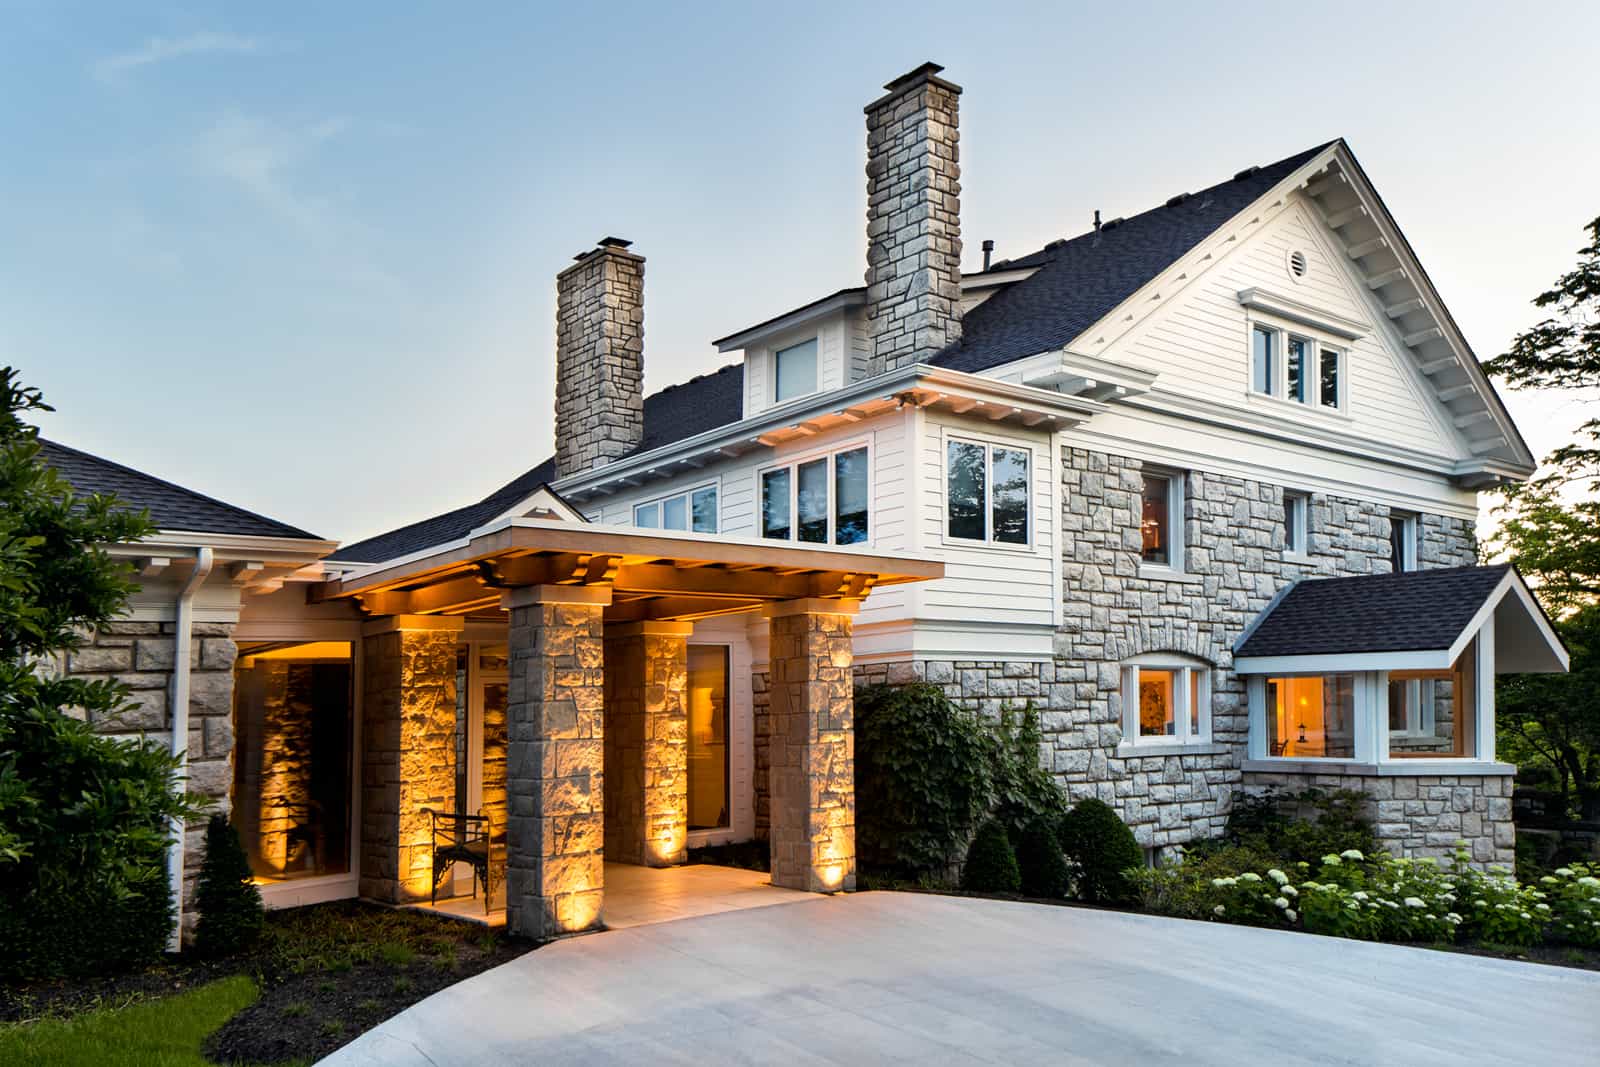 Historic home with new entryway made of matching stone to original